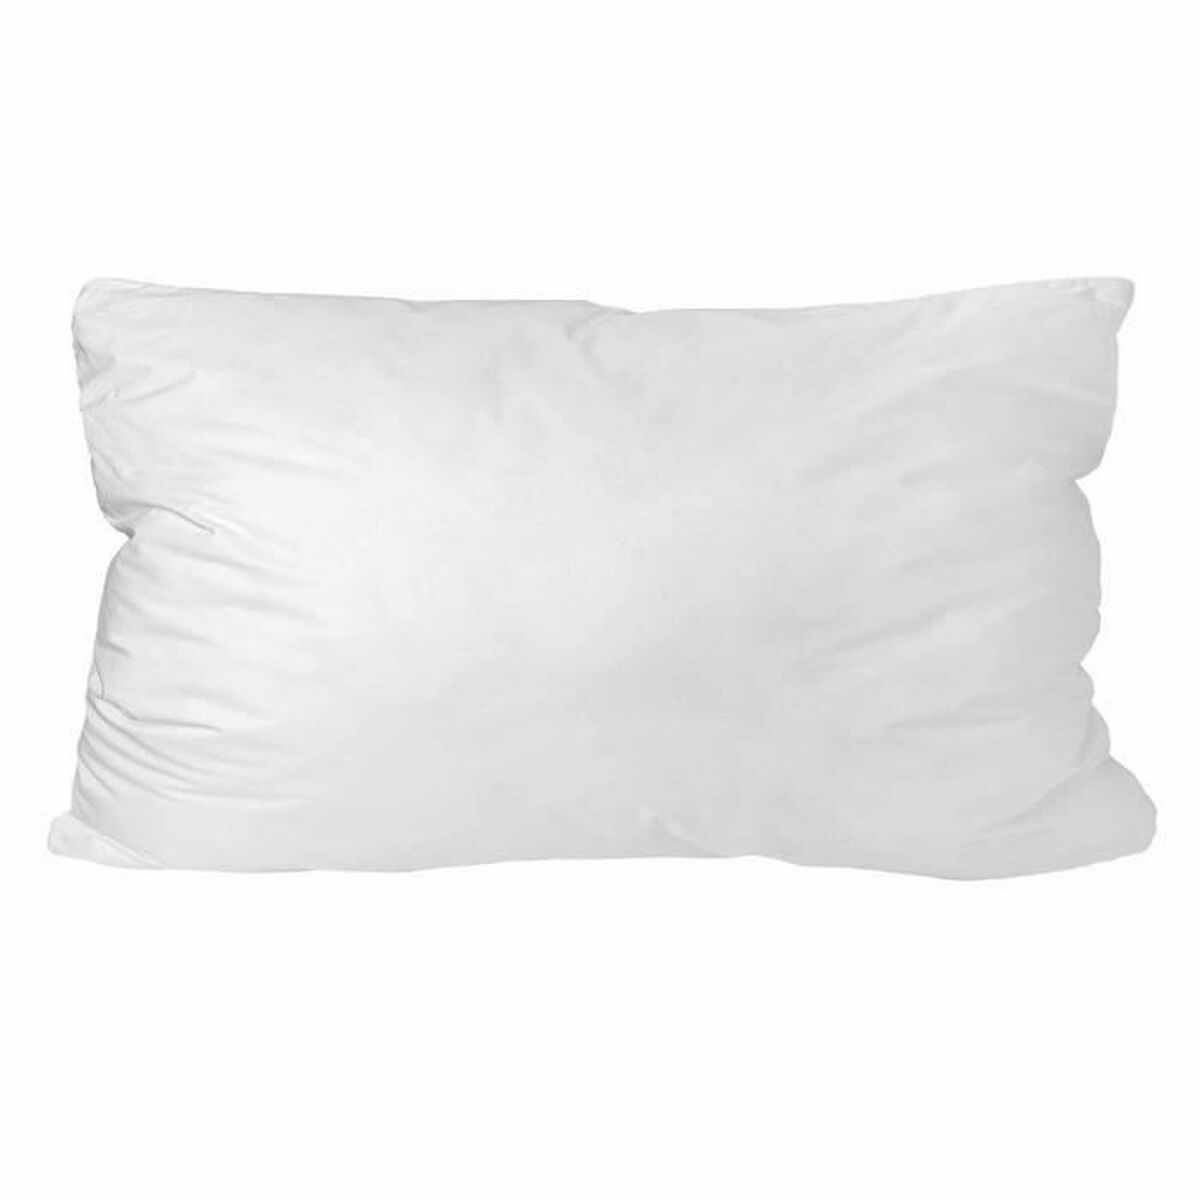 Pillow Toison D'or